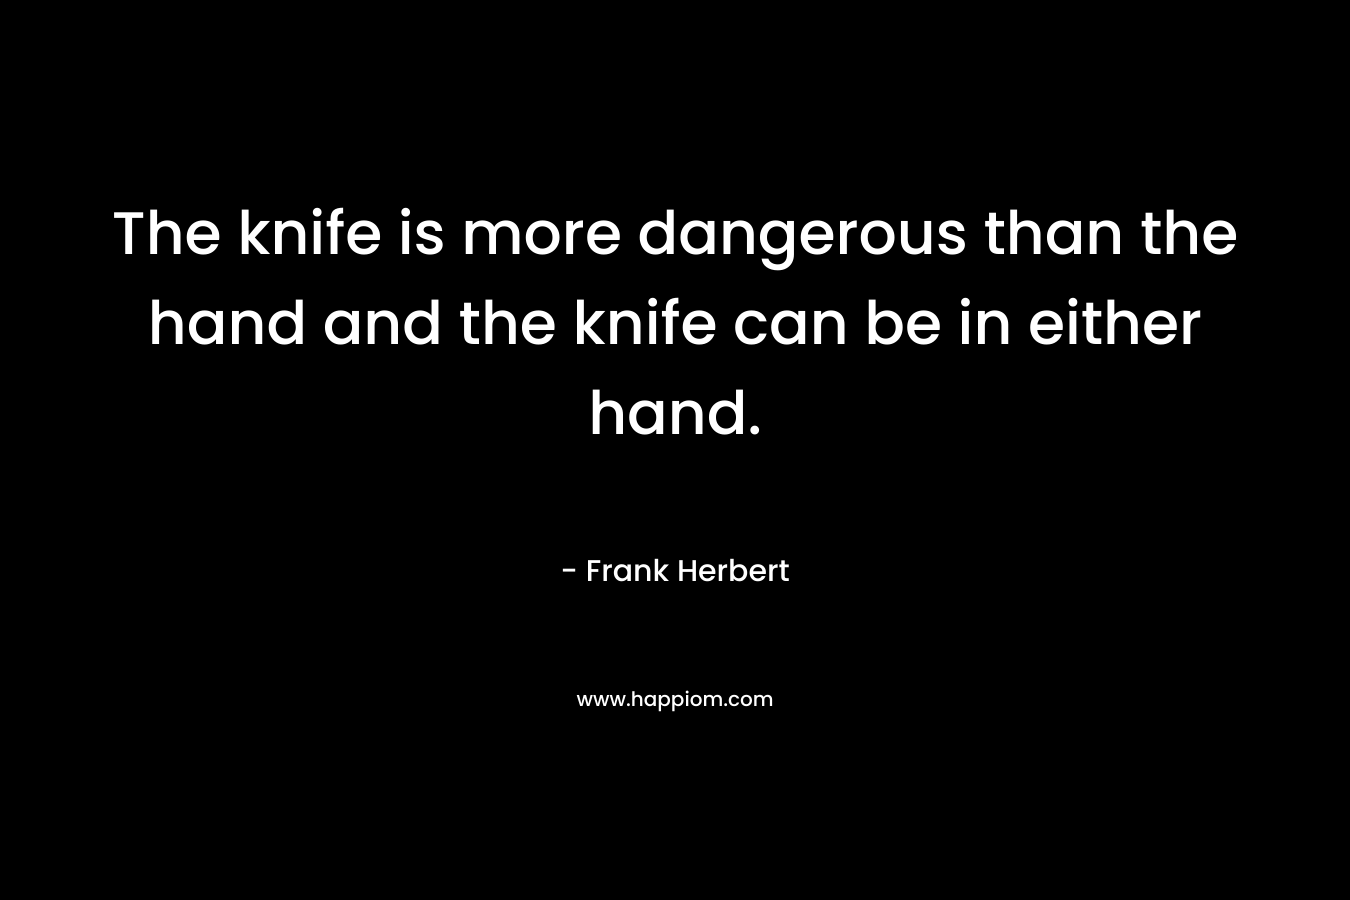 The knife is more dangerous than the hand and the knife can be in either hand. – Frank Herbert